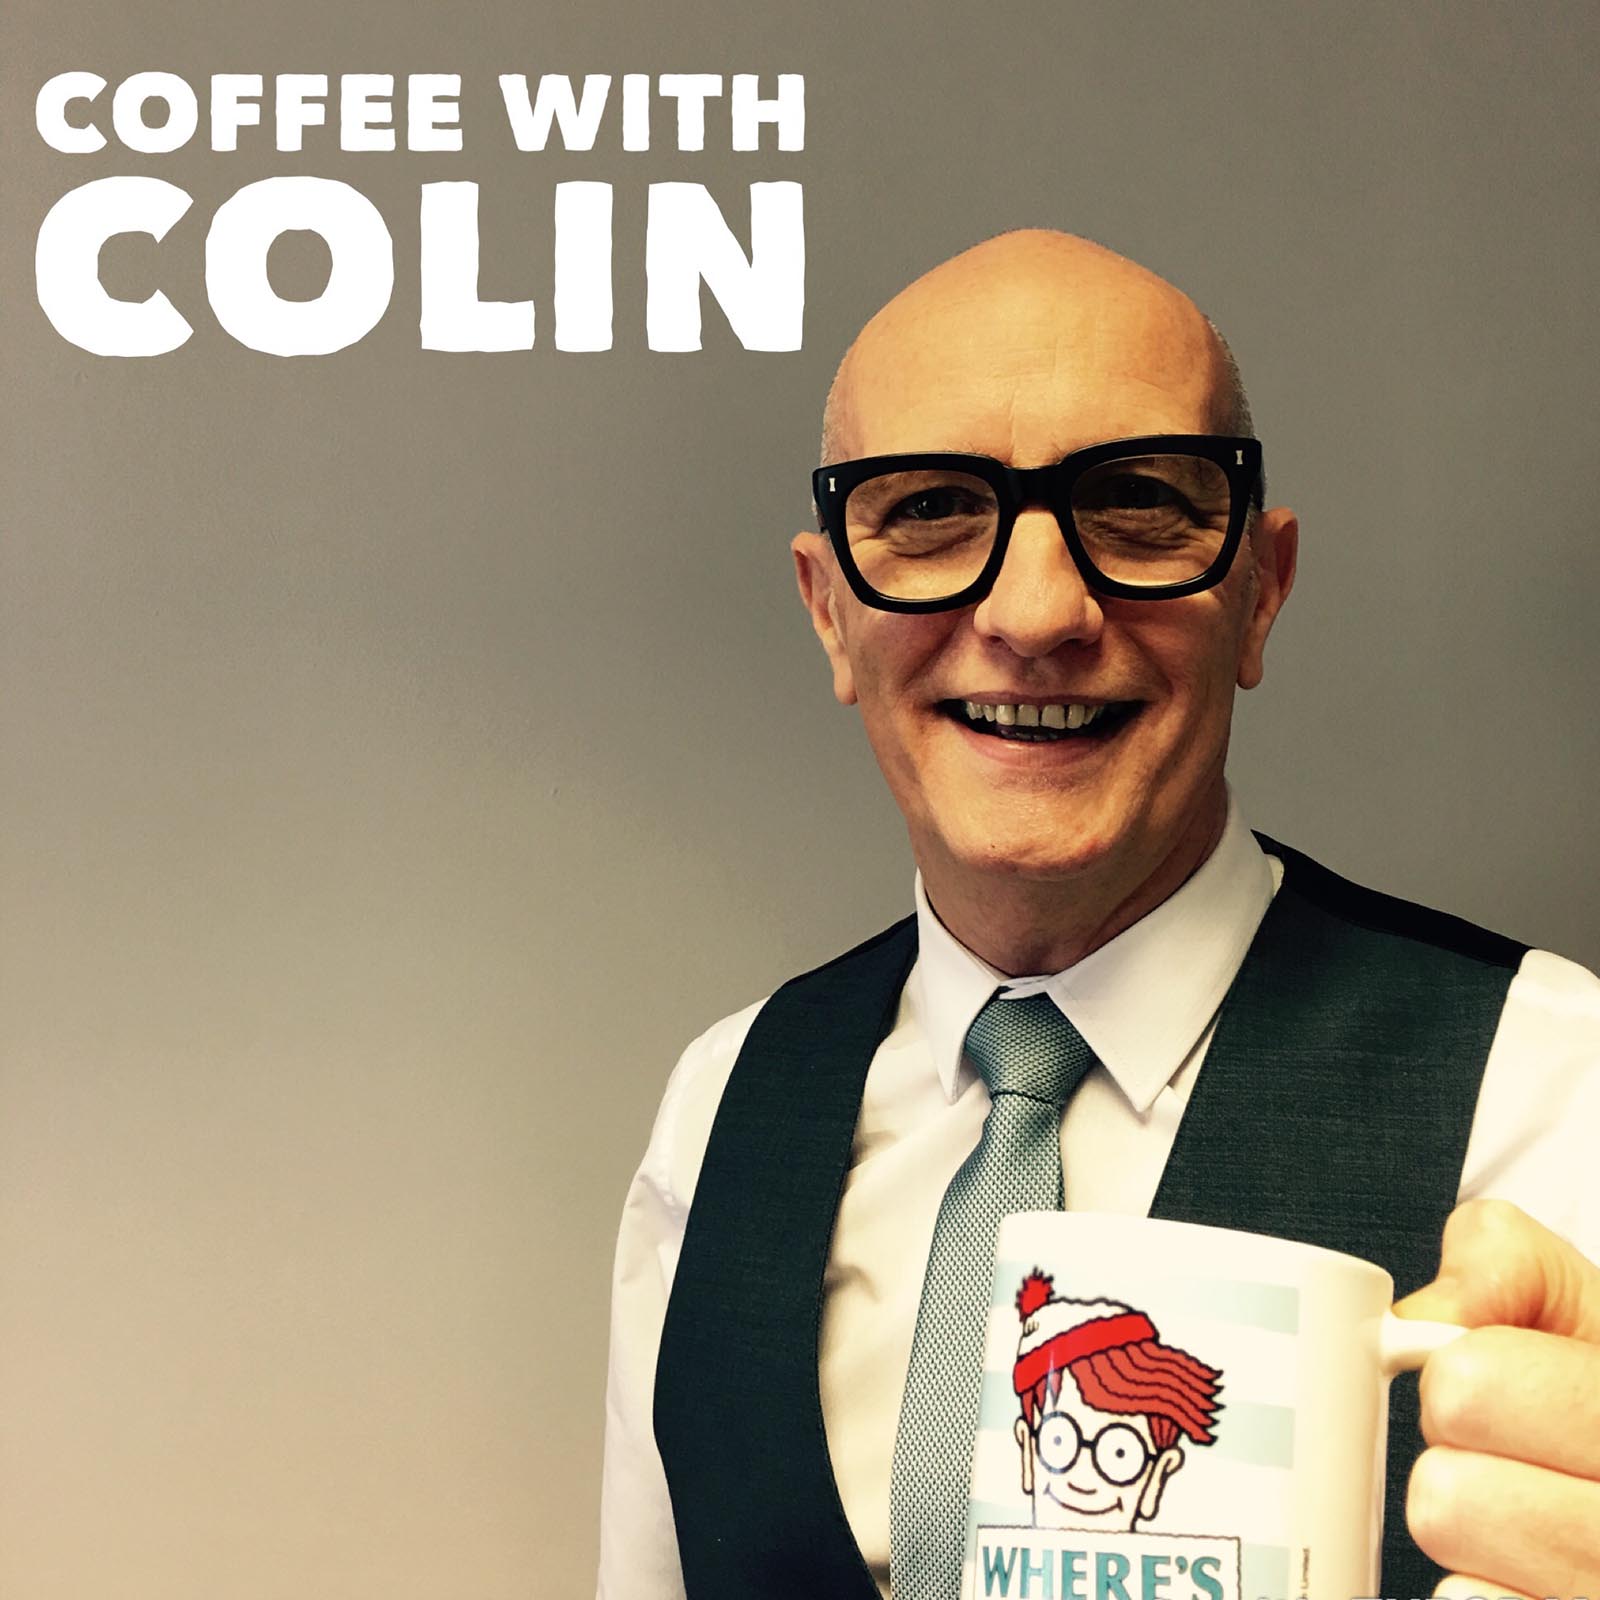 COFFEE WITH COLIN COMES TO NEWRY NEXT TUESDAY 24 OCT